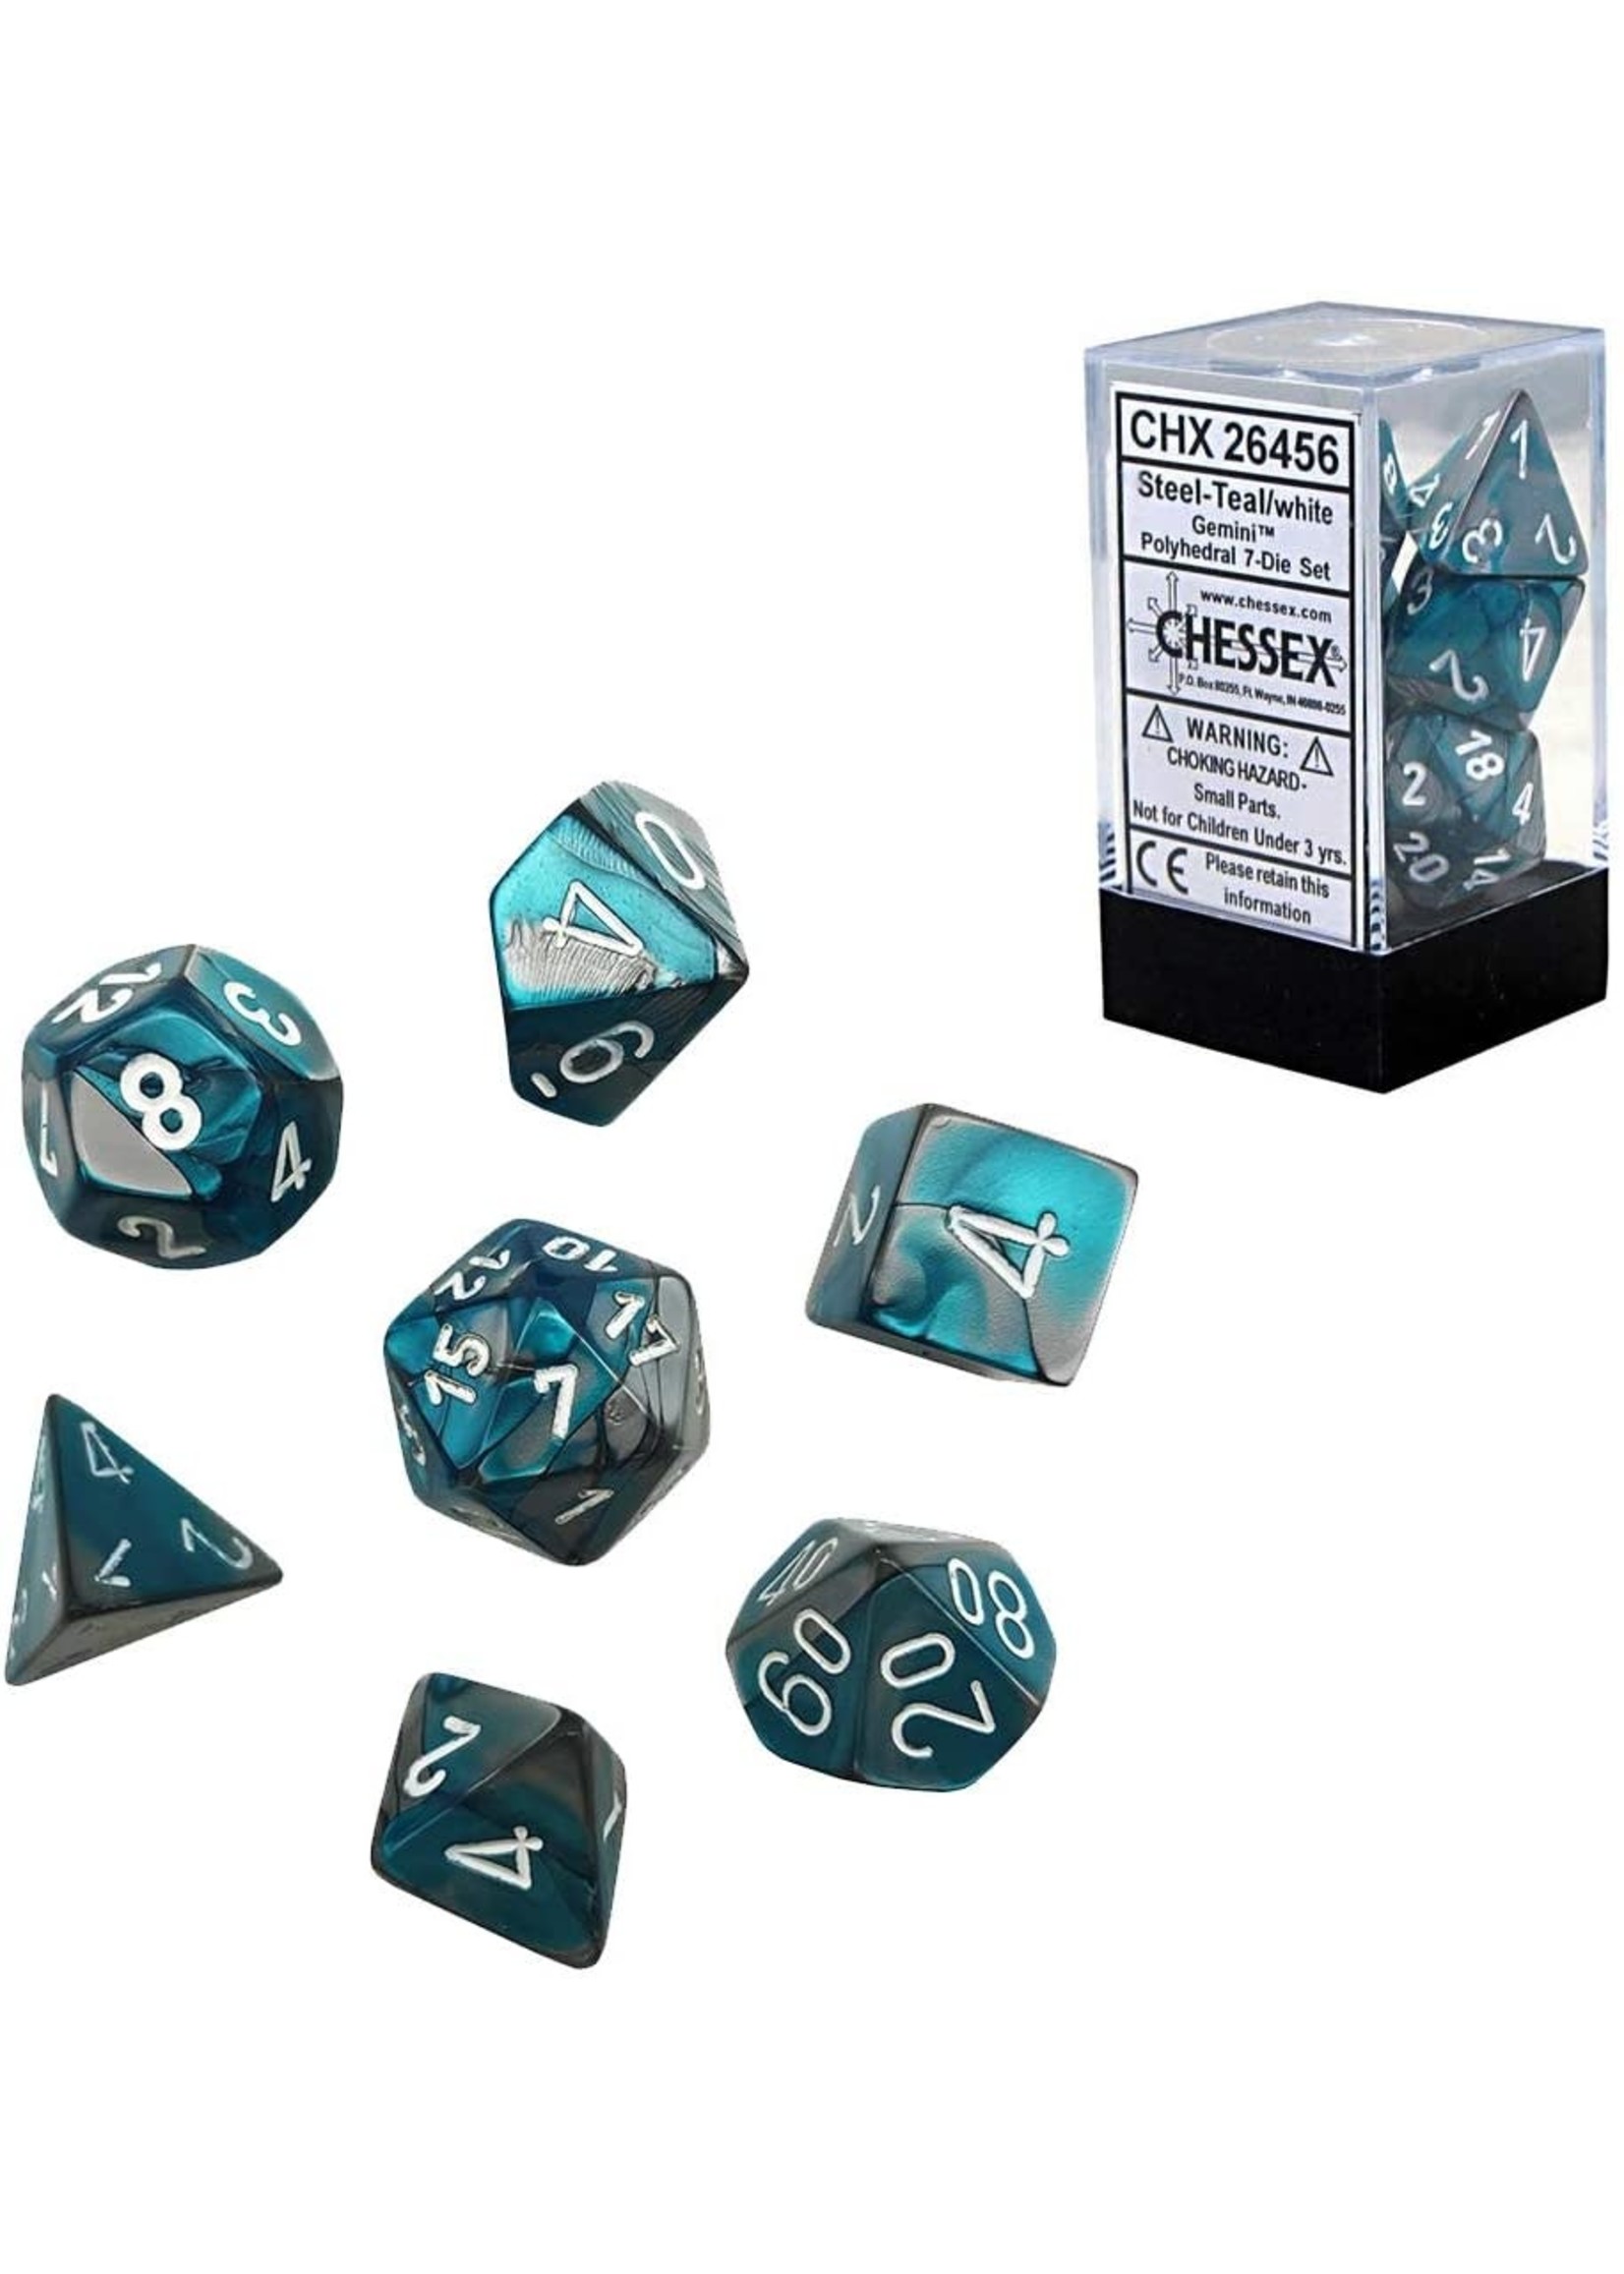 Chessex Gemini Poly 7 set:  Steel & Teal w/ White